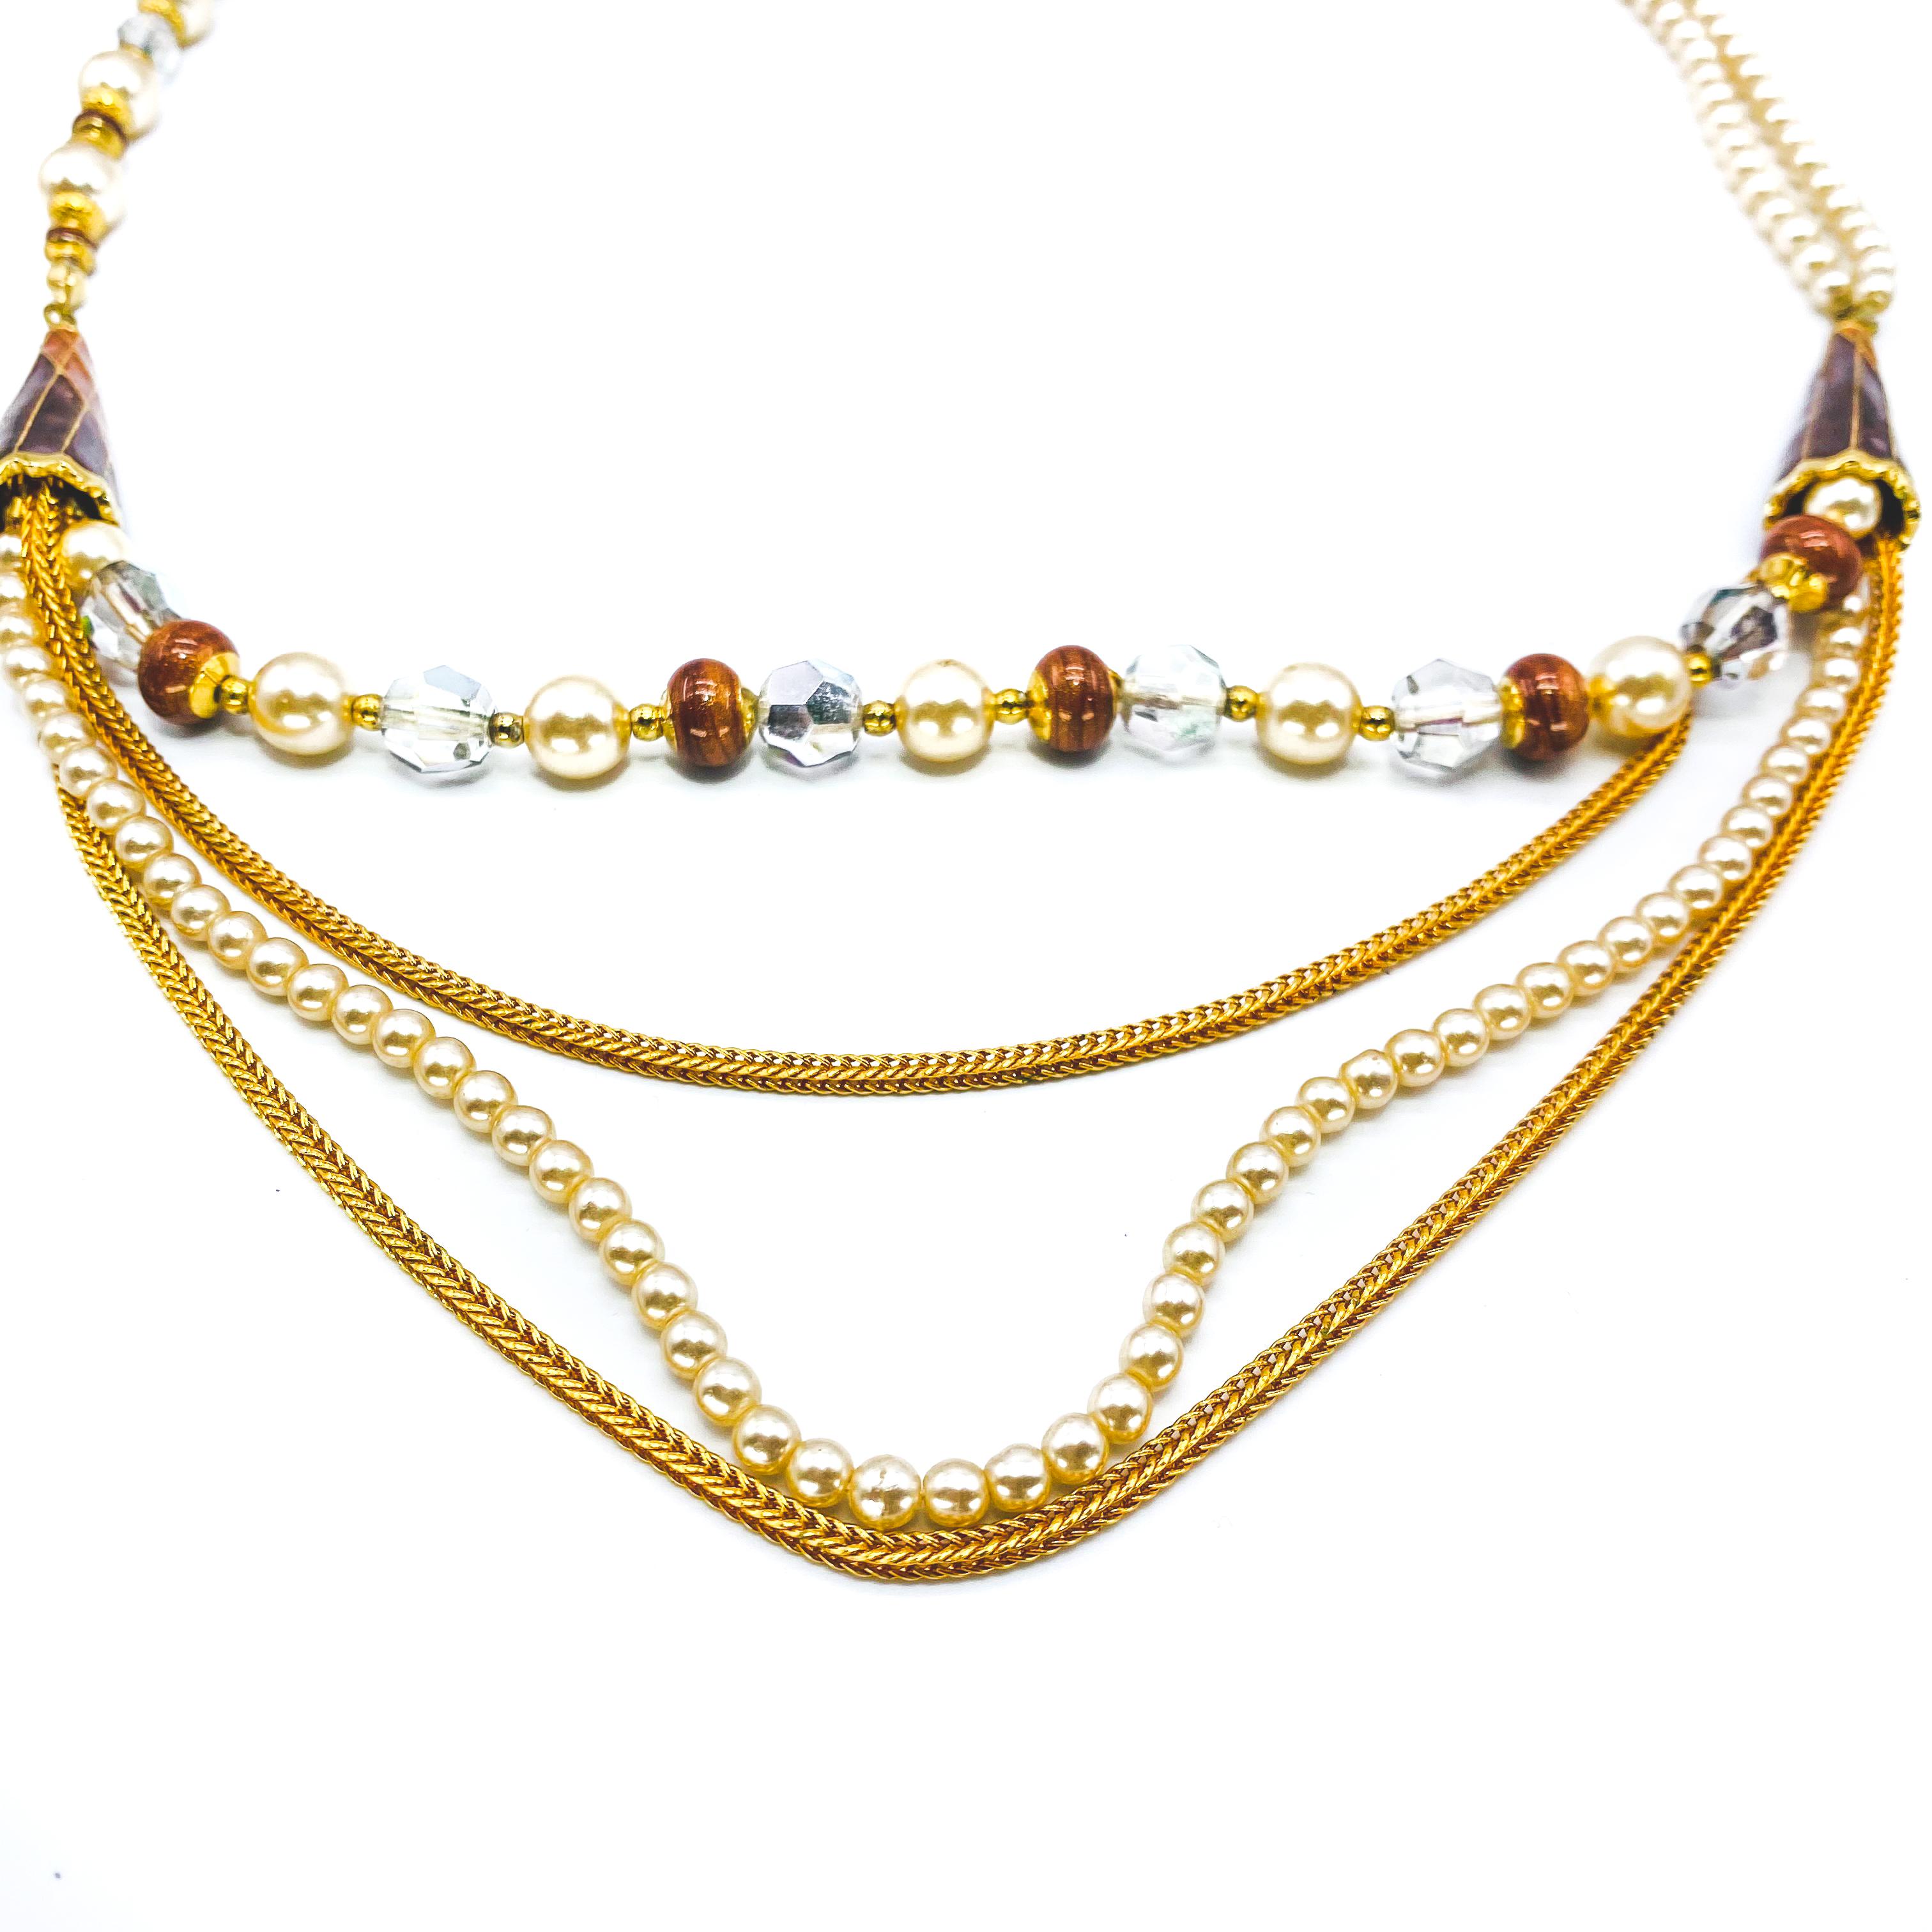 Balenciaga Vintage 1970s Multistrand Necklace

Beautiful multi-strand necklace from the iconic Cristobal Balenciaga

Detail
-Made in France in Italy in the early 1970s
-Asymmetrical design
-Simulated pearls with gold plated hardware

Size &